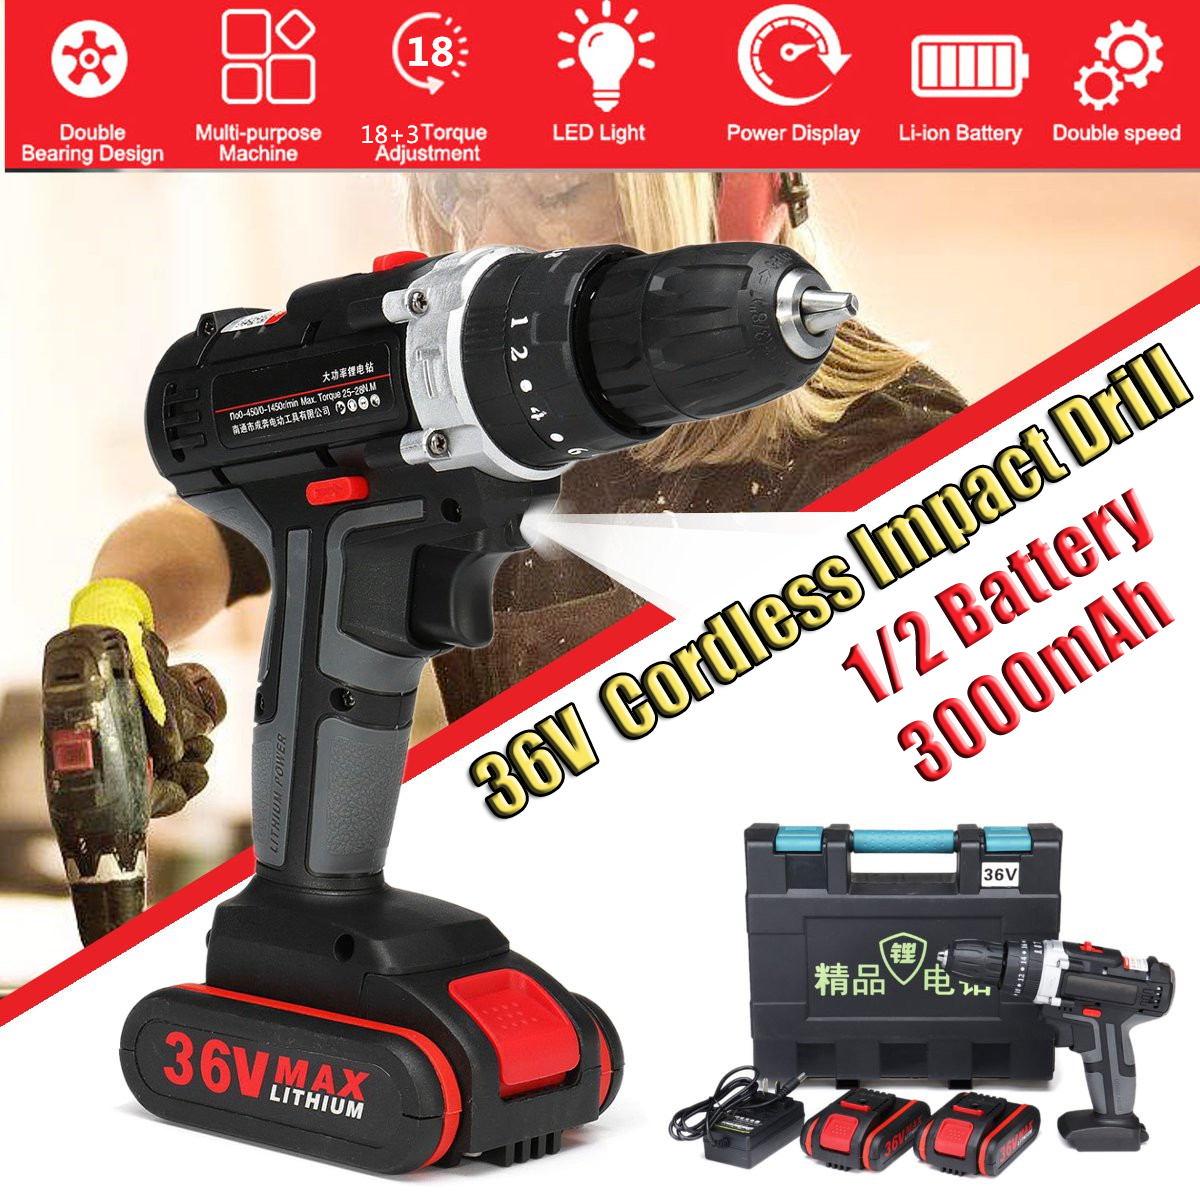 36V-Cordless-Lithium-Electric-Drill-Impact-Power-Drills-28Nm-3000mAh-183-Torque-Stage-Drill-Tools-1404353-2